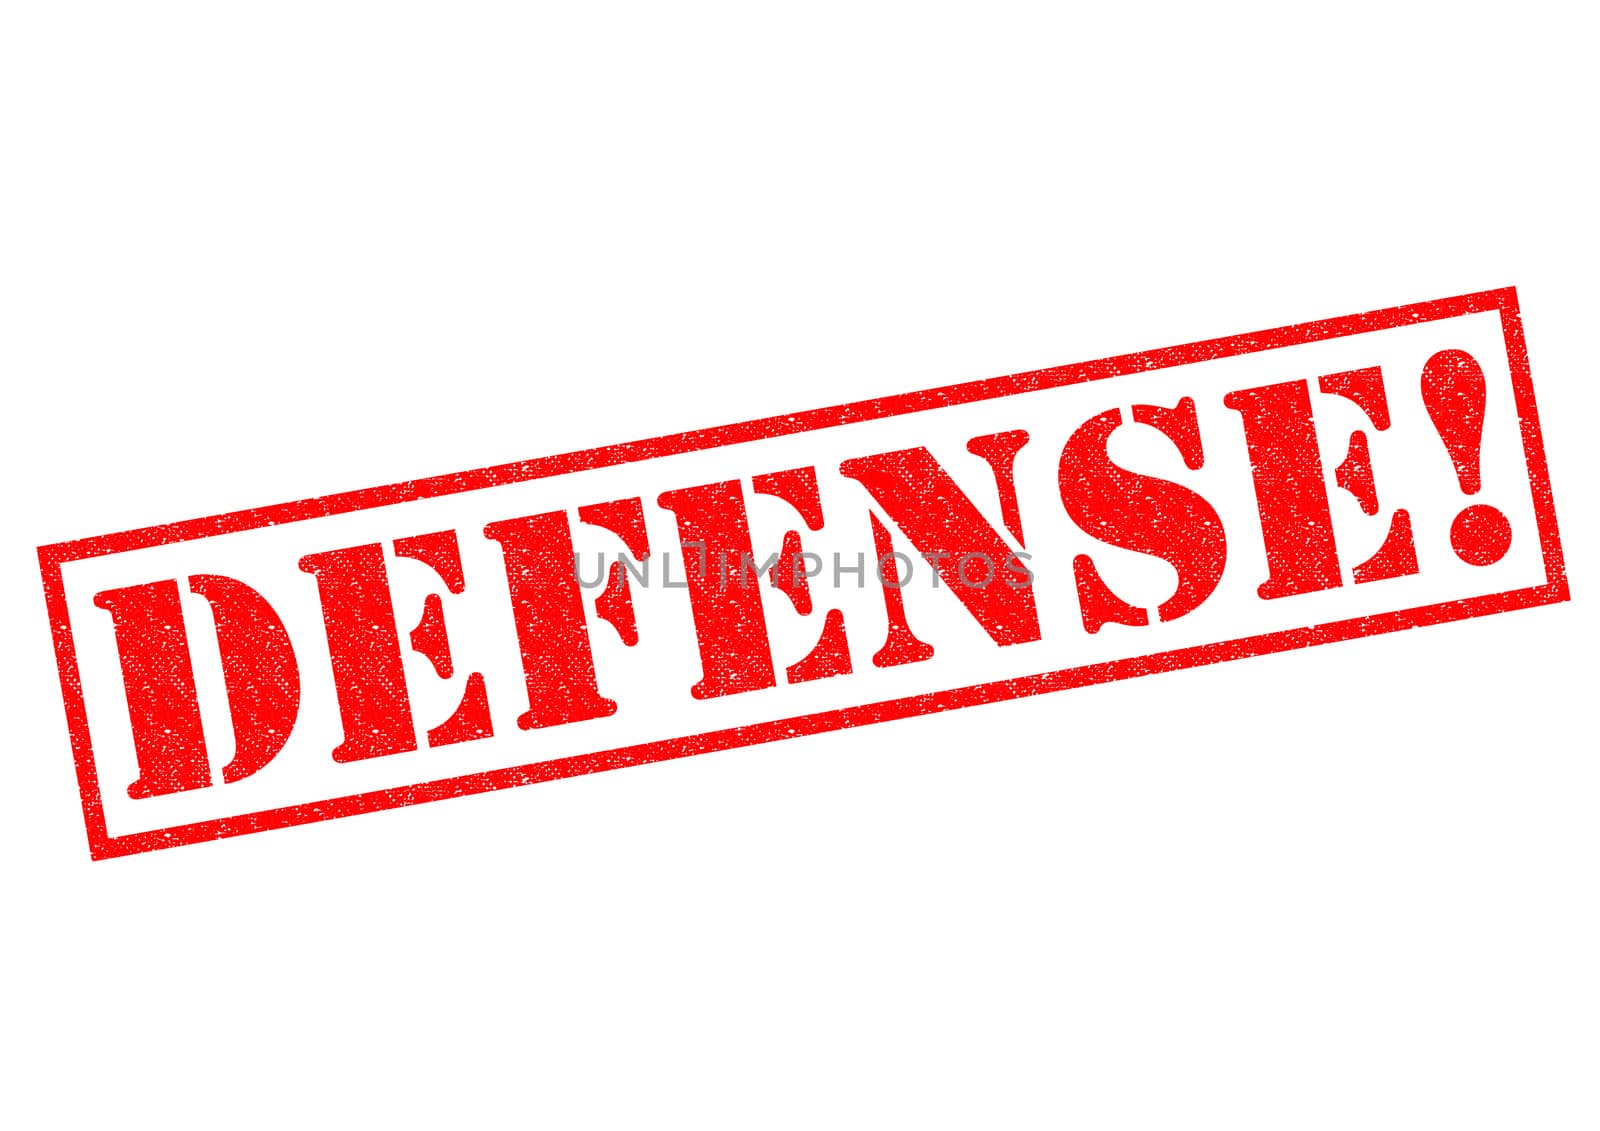 DEFENSE! red Rubber Stamp over a white background.